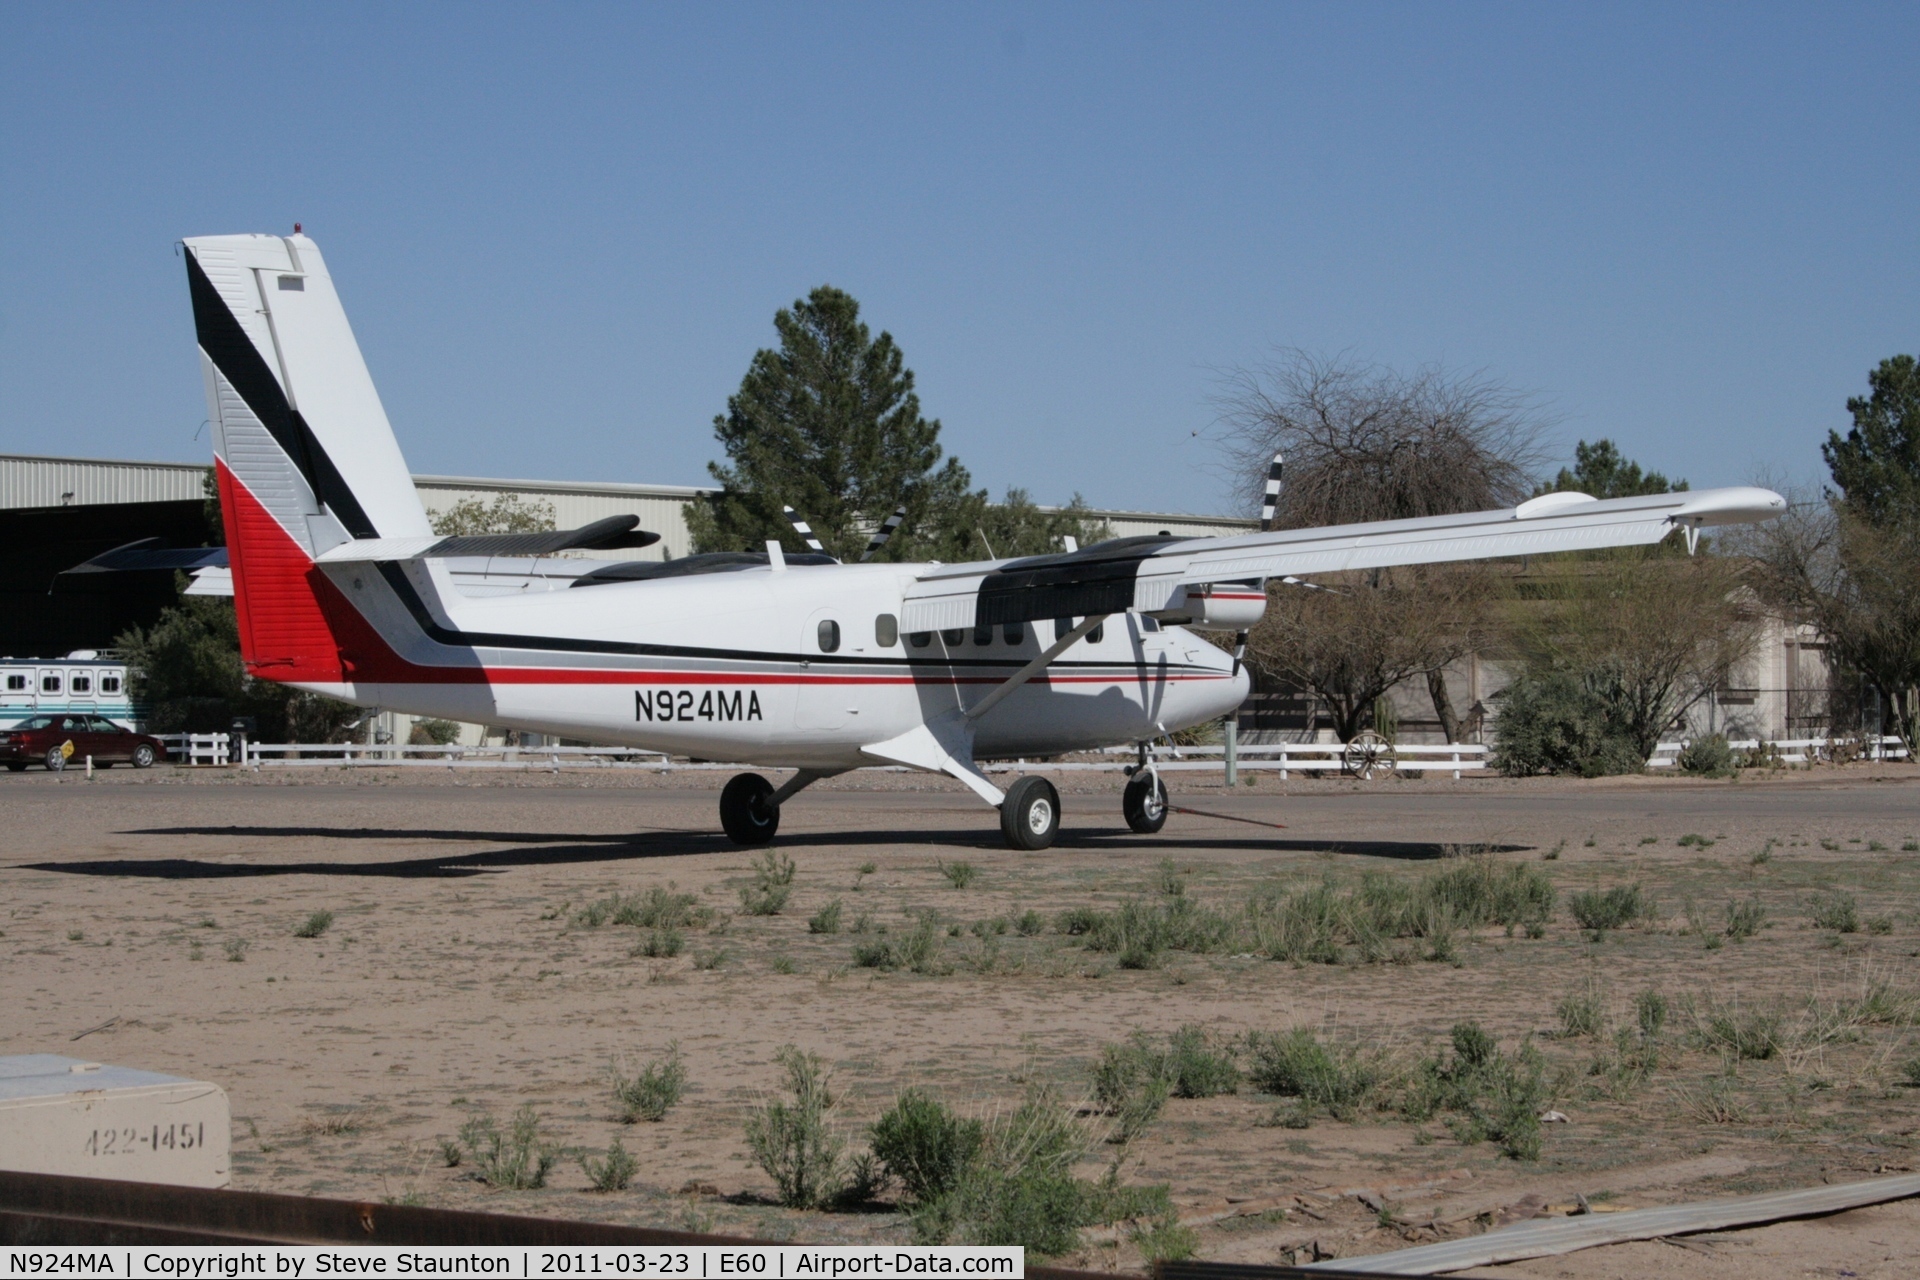 N924MA, 1969 De Havilland Canada DHC-6-200 Twin Otter C/N 216, Taken at Eloy Airport, in March 2011 whilst on an Aeroprint Aviation tour